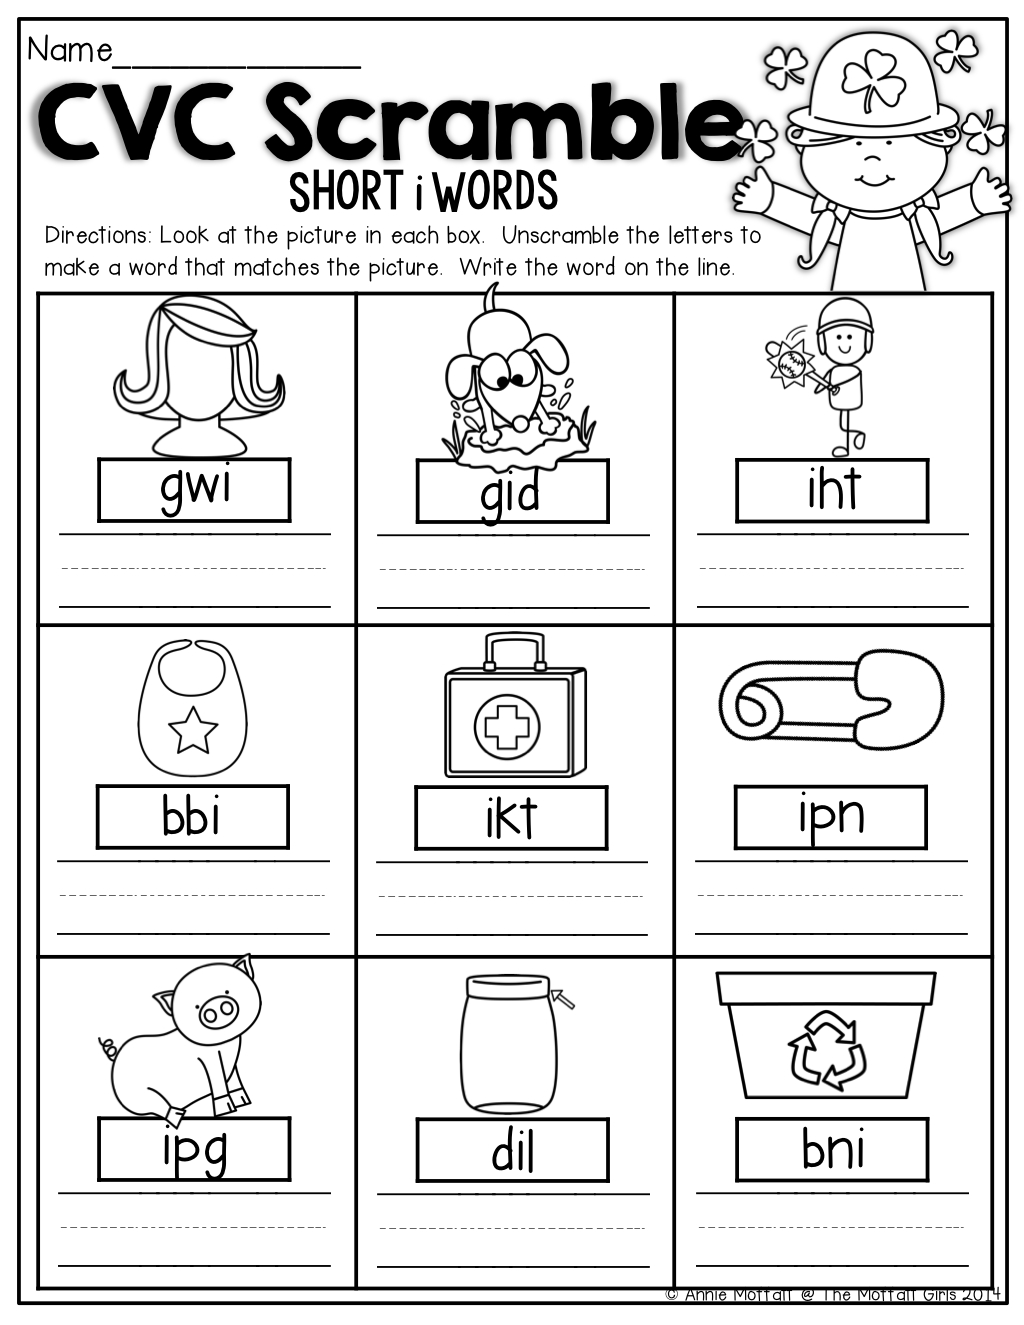 Cvc Scramble! Unscramble The Letters To Make A Word That Matches The - Cvc Words Worksheets Free Printable